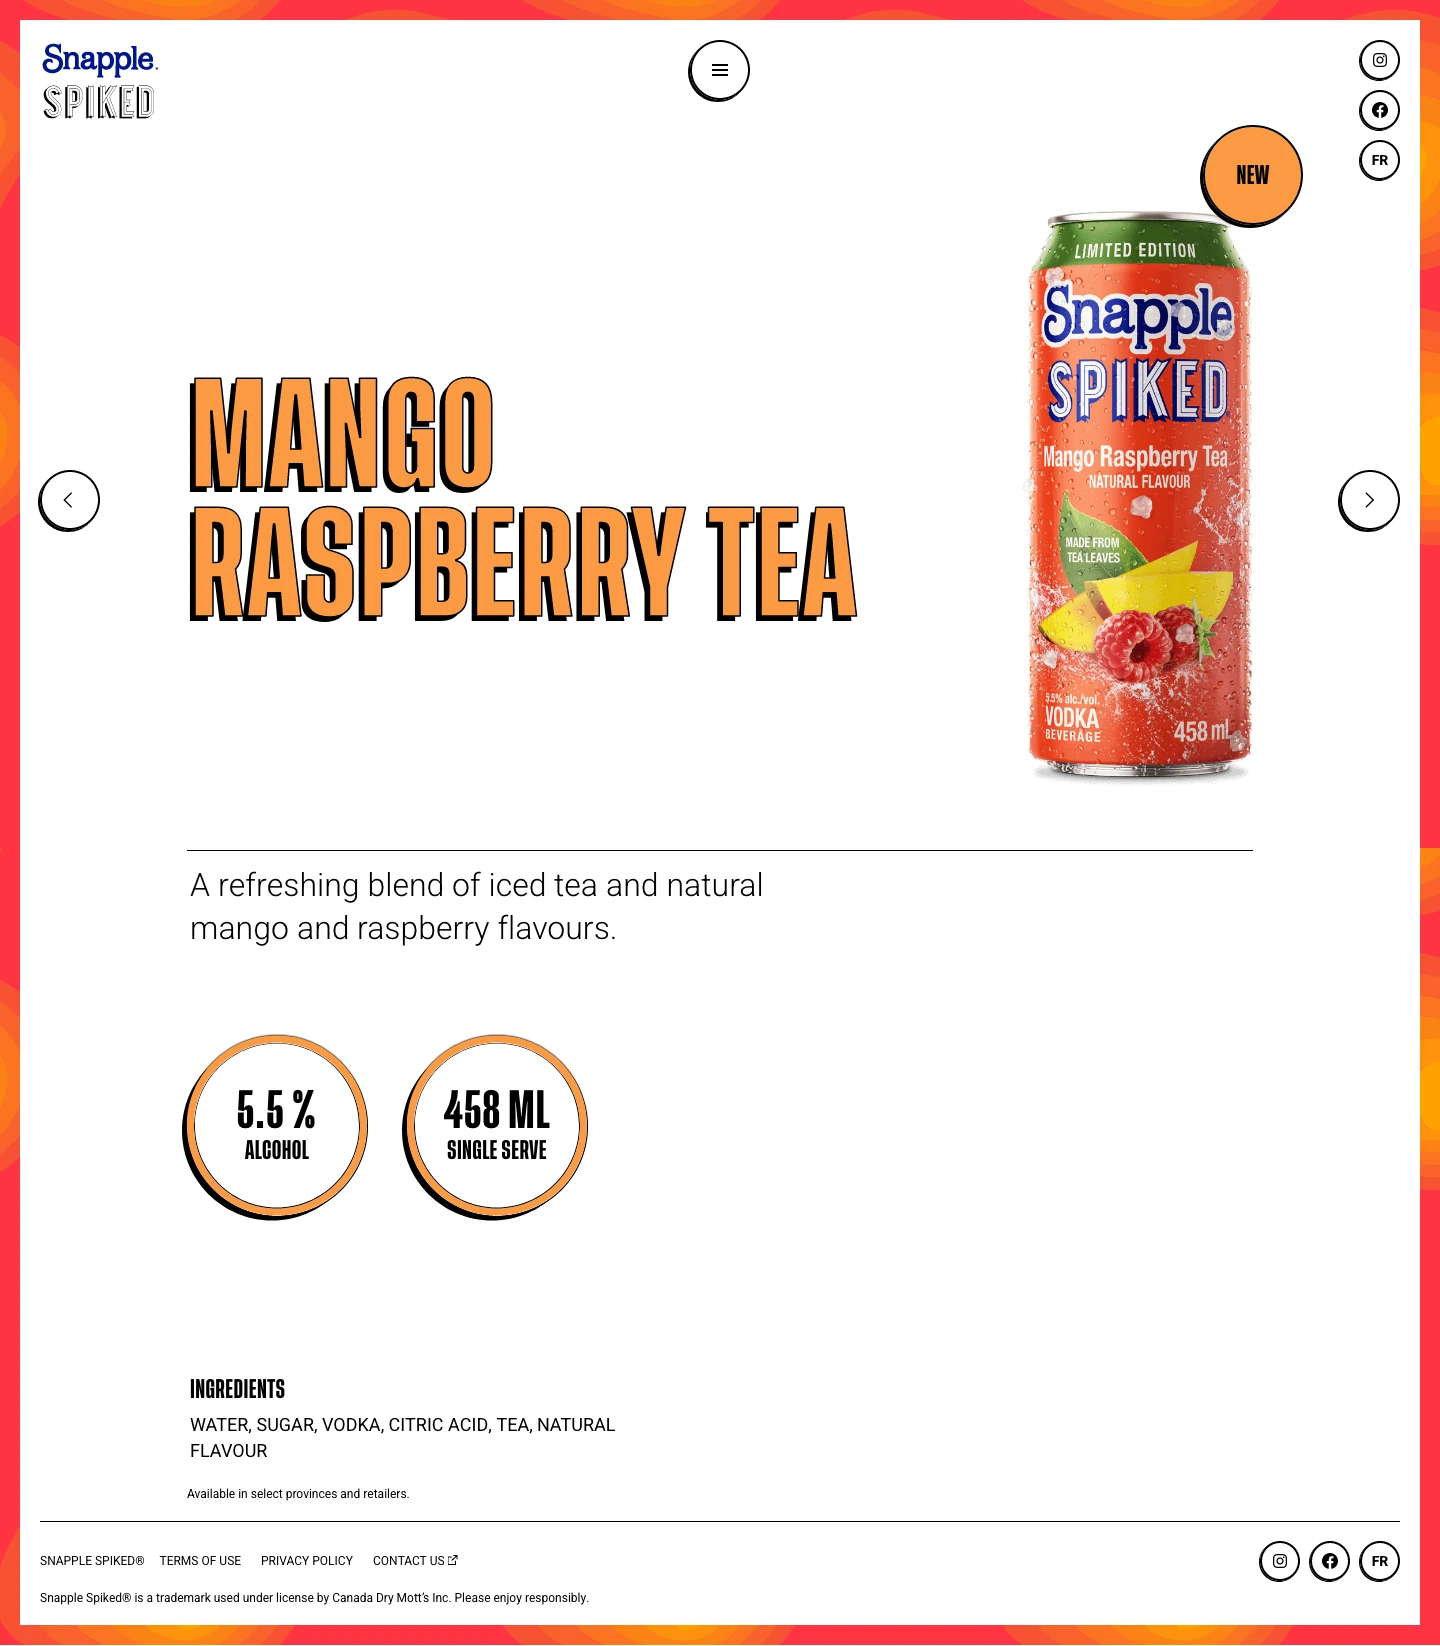 Snapple Spiked Landing Page Example: Tea & refreshing fruit flavours mixed with vodka- what more could you want?